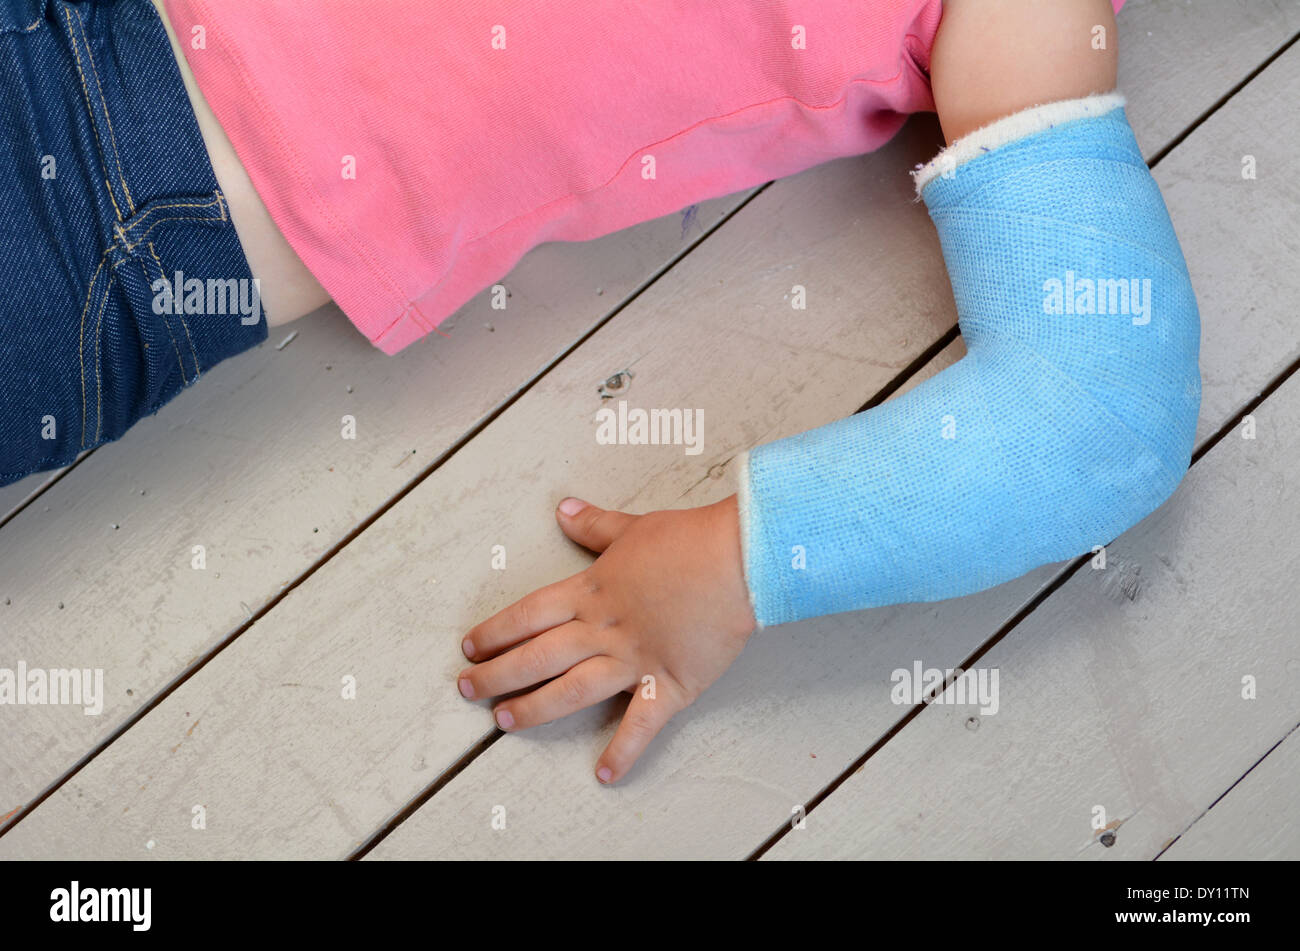 Child with a broken arm wearing a cast. Concept photo of child Stock Photo  - Alamy